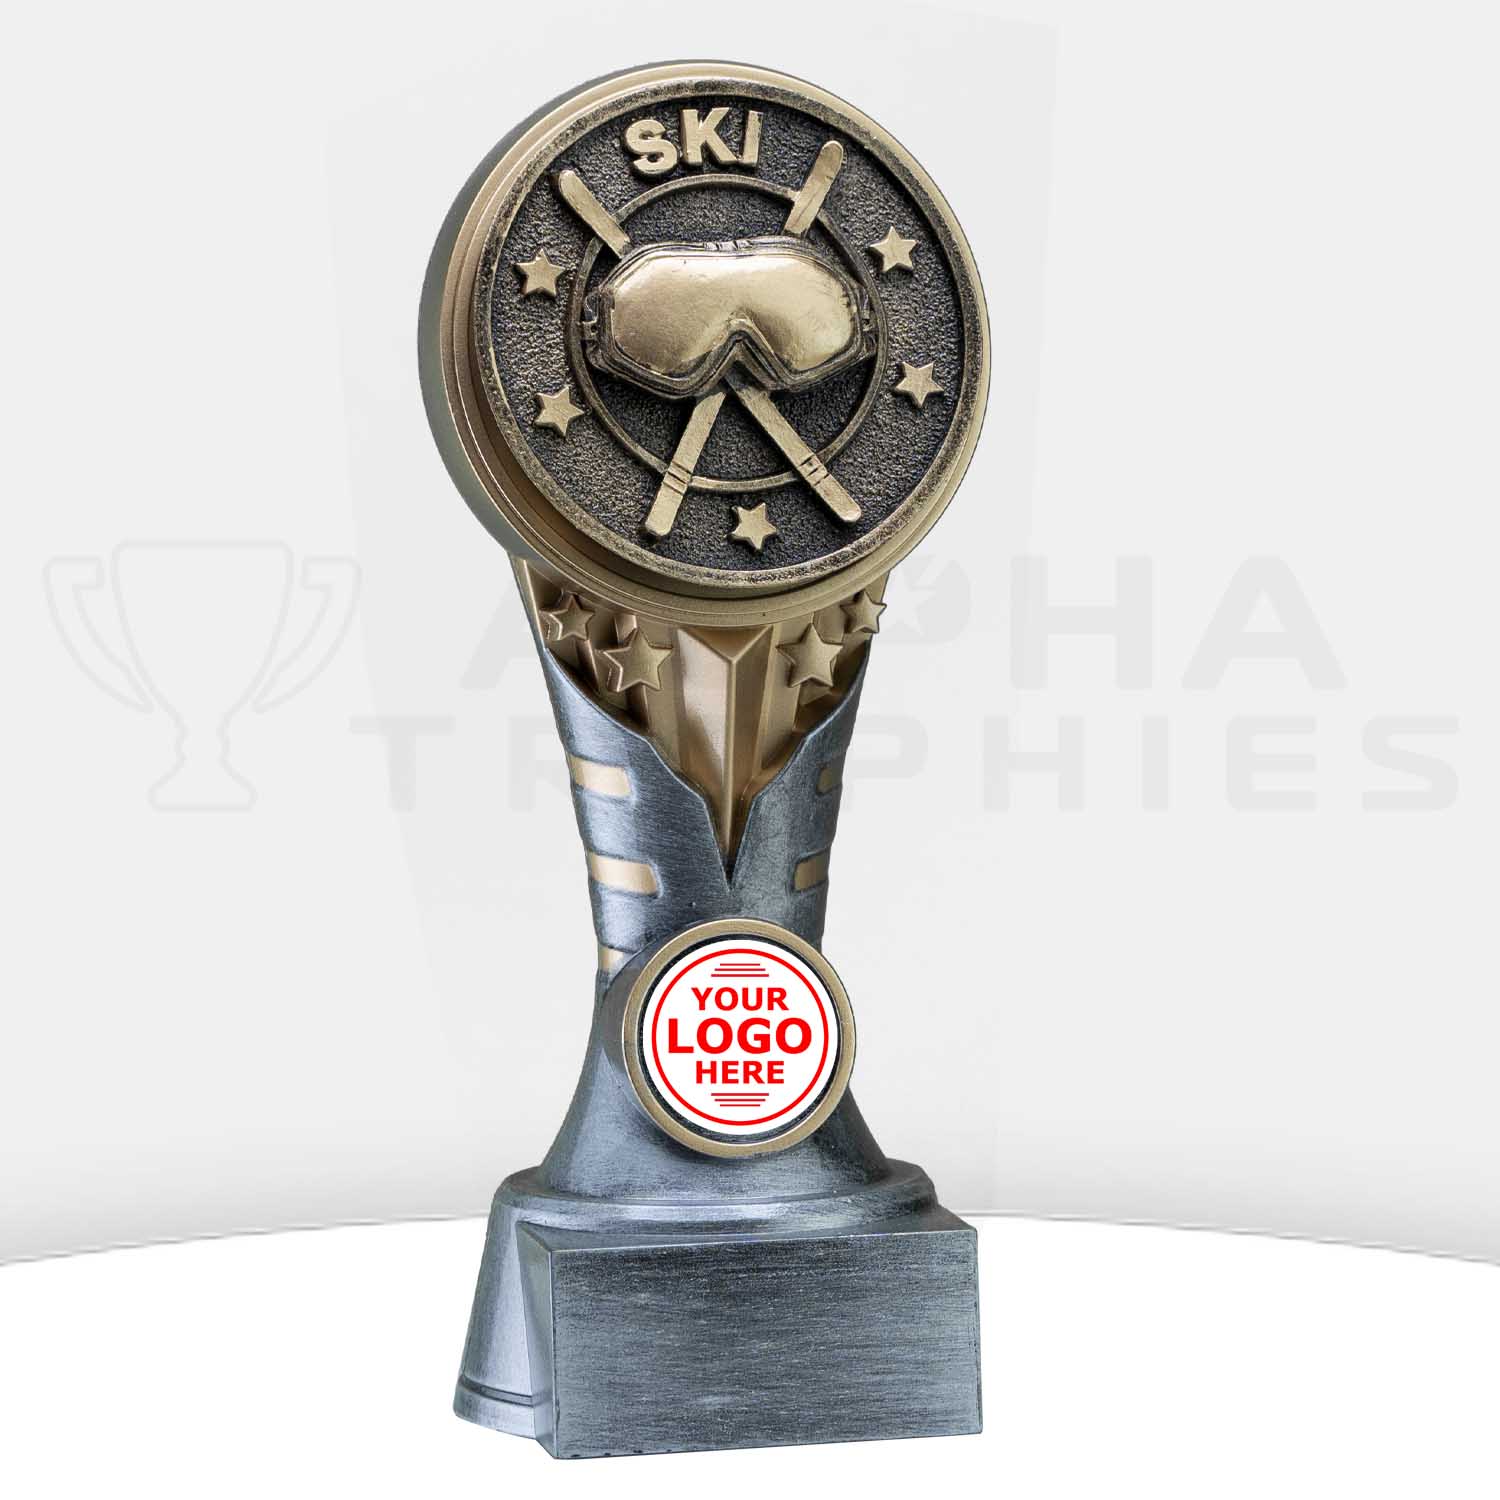 ikon-trophy-ski-kn292a-front-with-logo